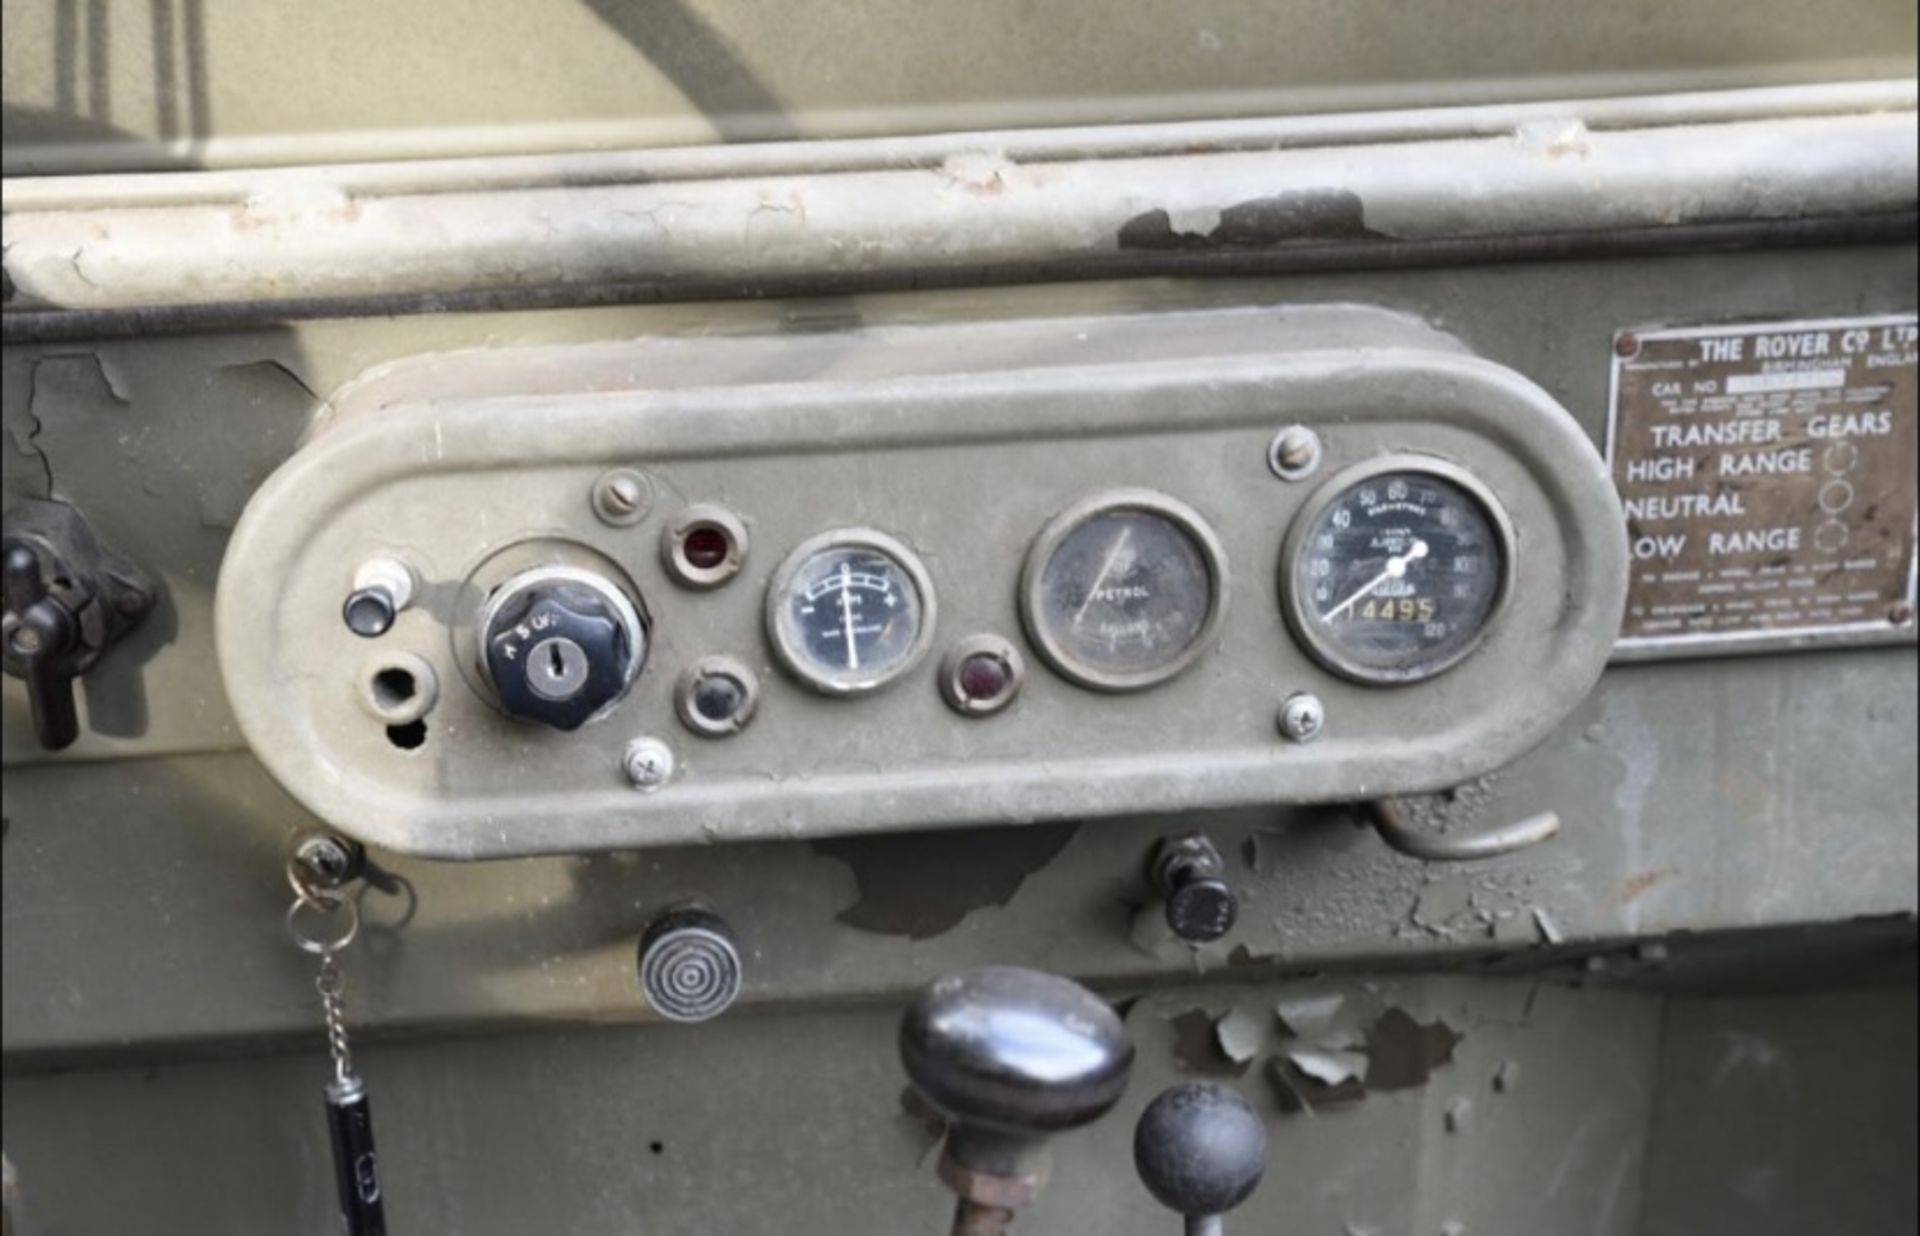 LAND ROVER SERIES 1 1952 - Image 9 of 9